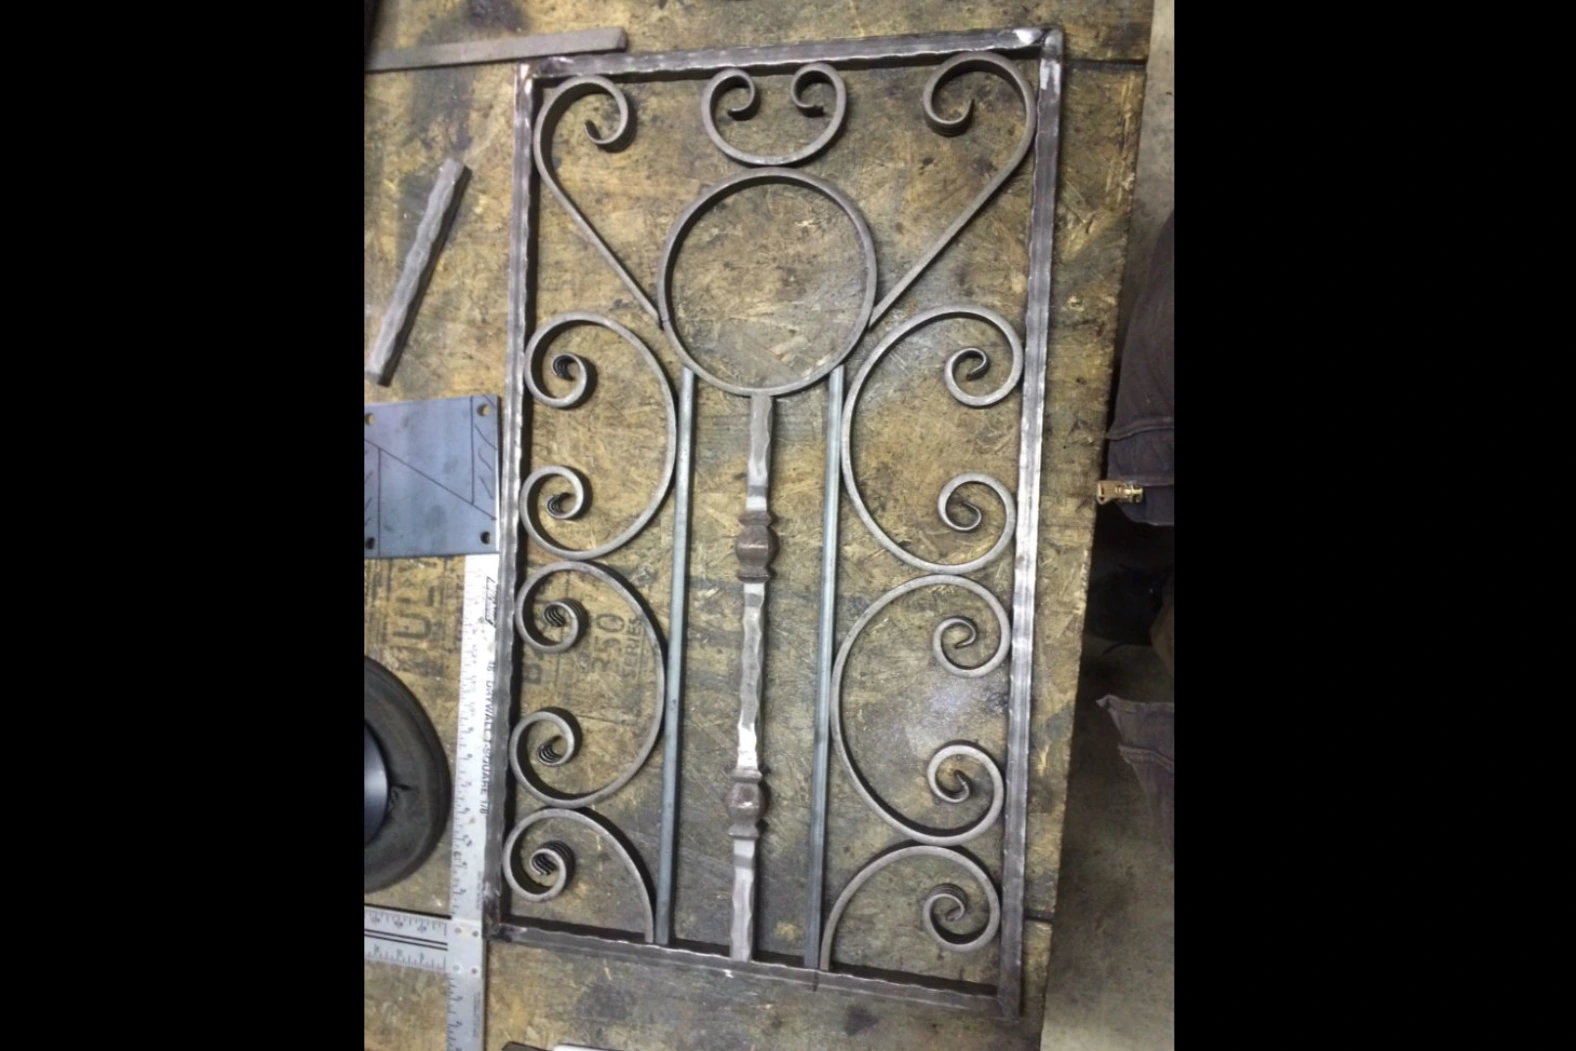 Photo of grey decorative metalwork resting on a work table